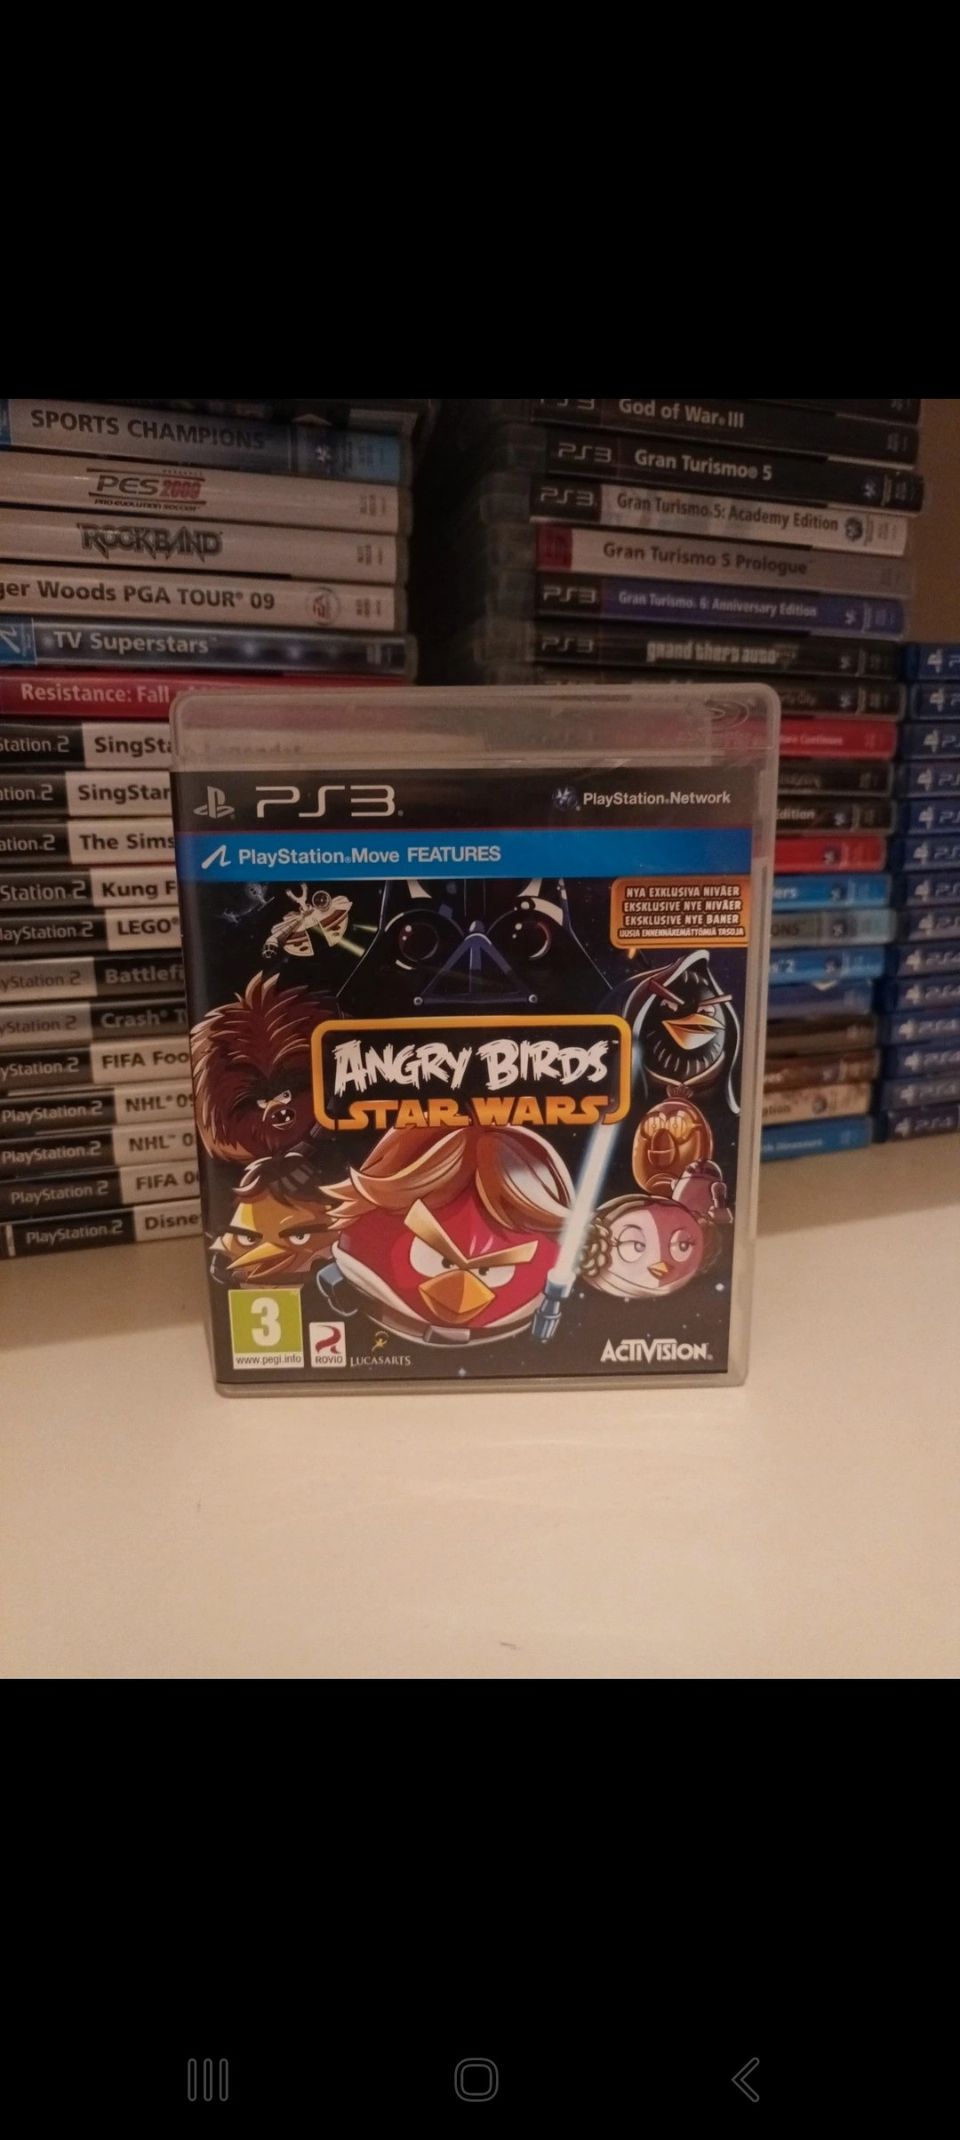 Ps3 Angry birds